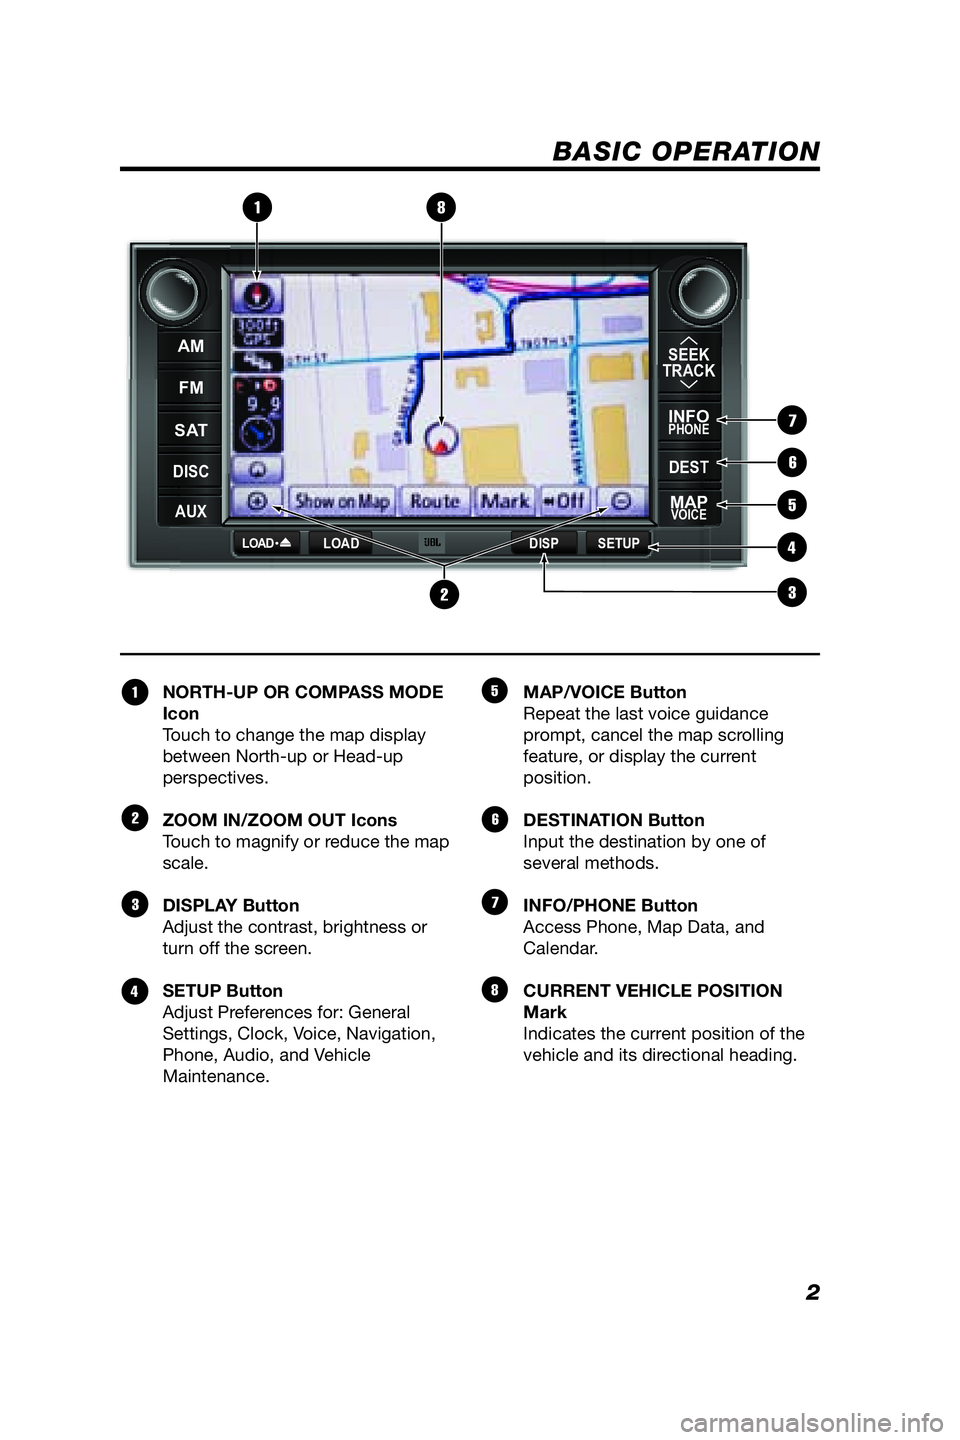 TOYOTA VENZA 2009  Accessories, Audio & Navigation (in English) 2
BASIC OPERATION
NORTH-UP OR COMPASS MODE 
Icon
Touch to change the map display 
between North-up or Head-up 
perspectives.
ZOOM IN/ZOOM OUT Icons
Touch to magnify or reduce the map 
scale.
DISPLAY B